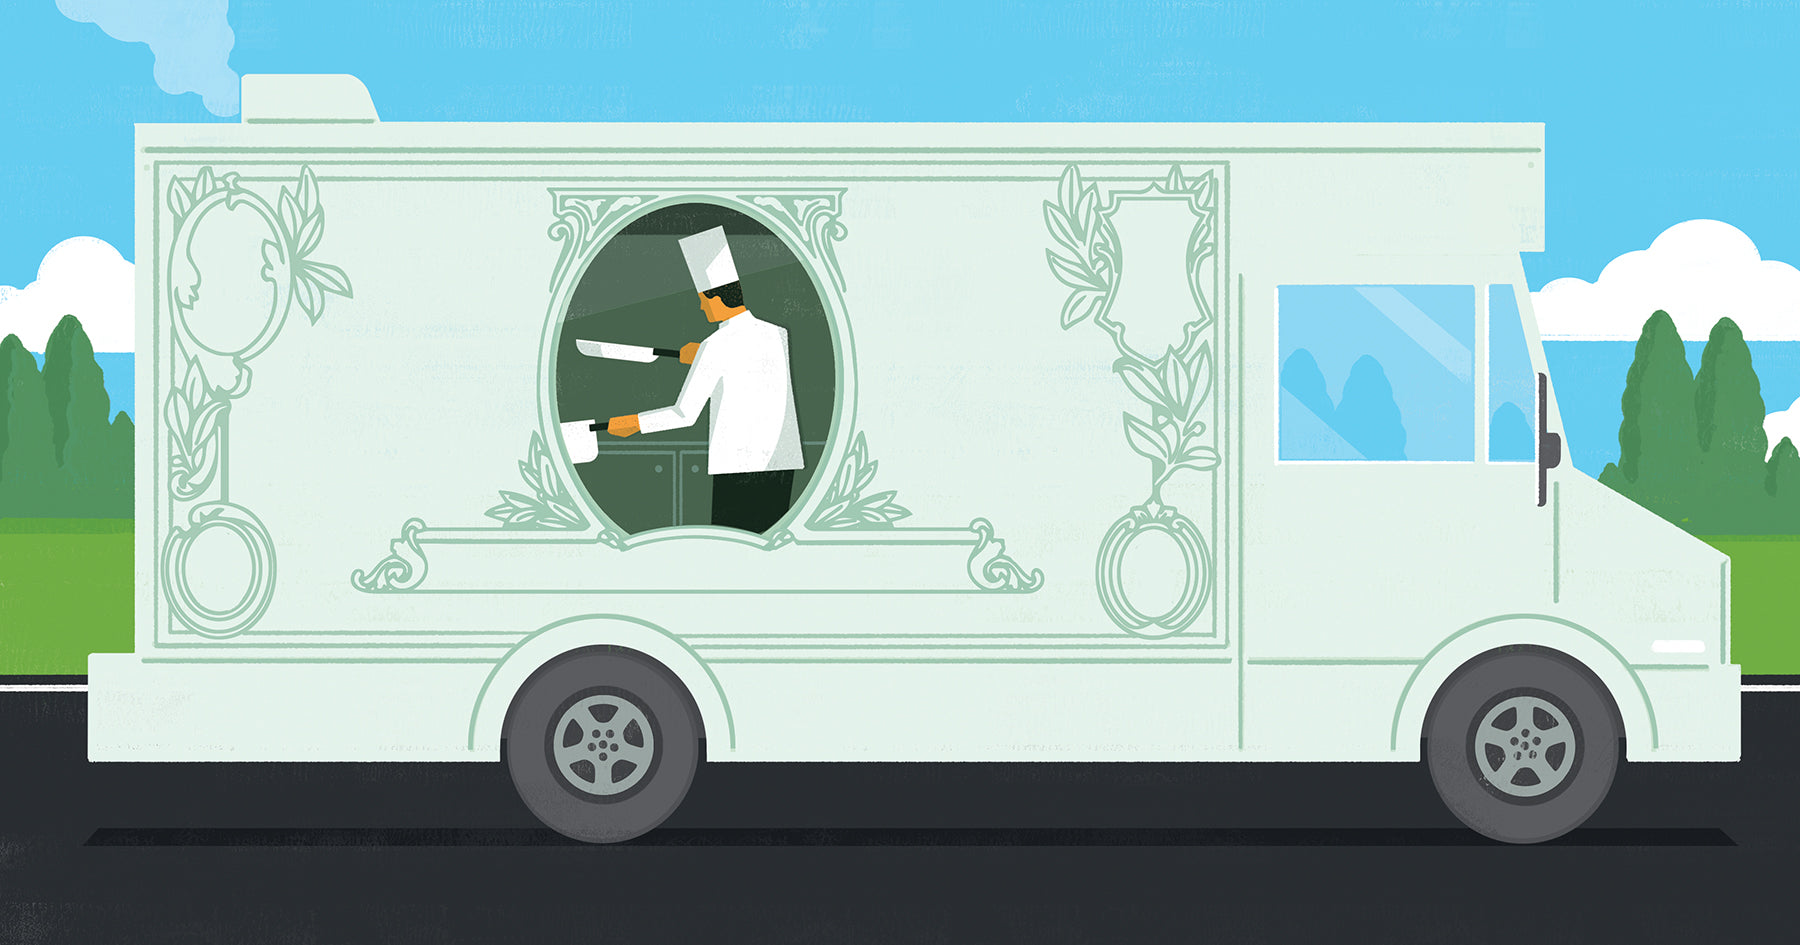 image of guy cooking in a money themed food truck